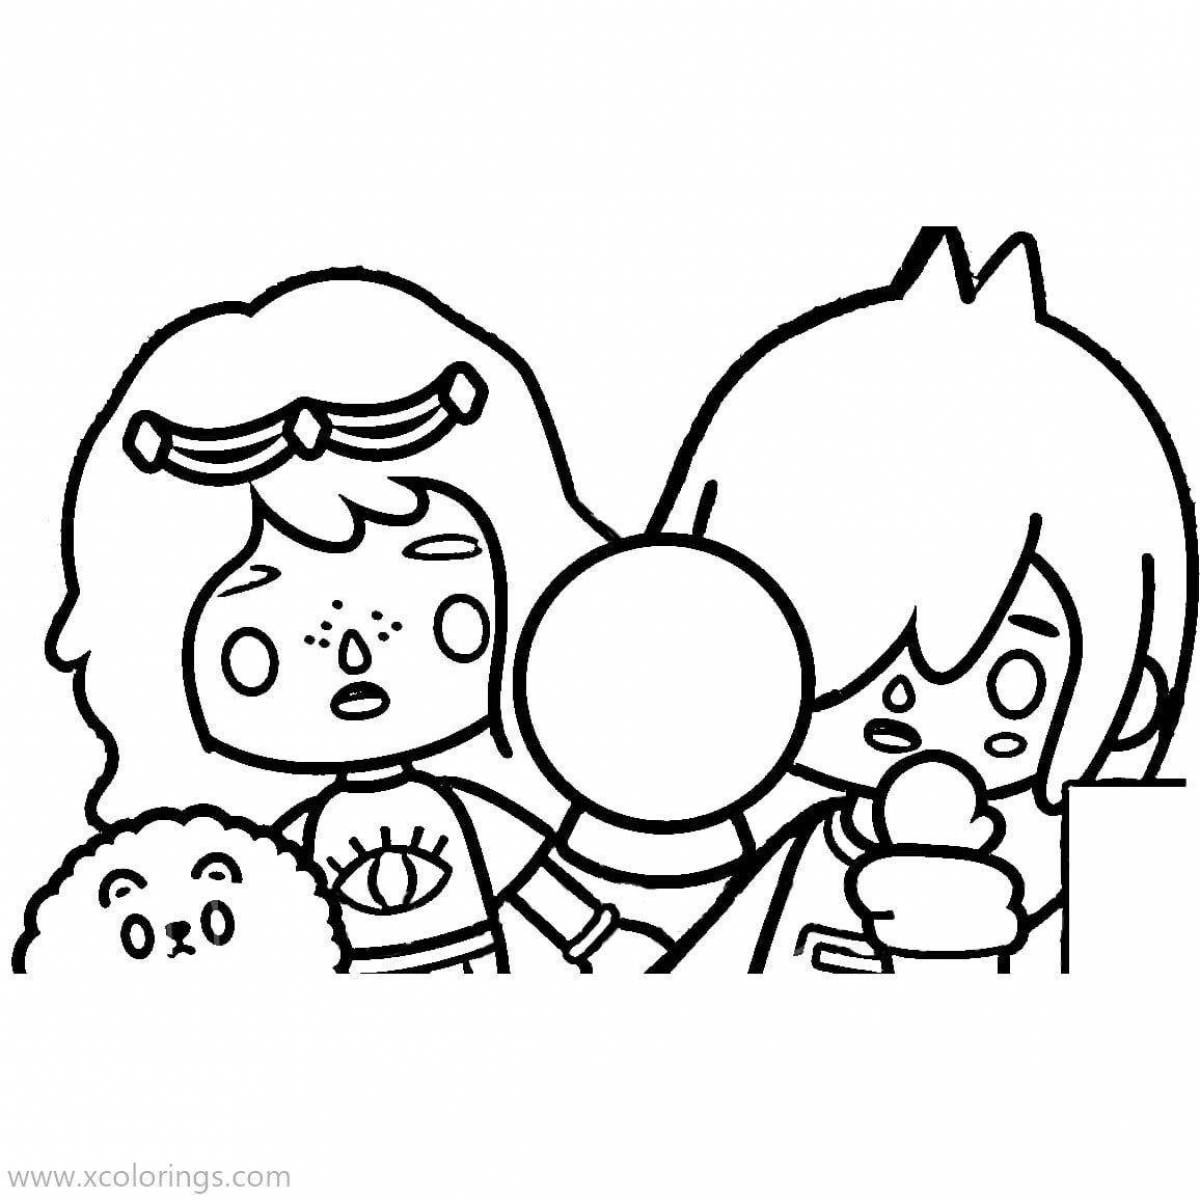 Adorable toilet coloring page on current side